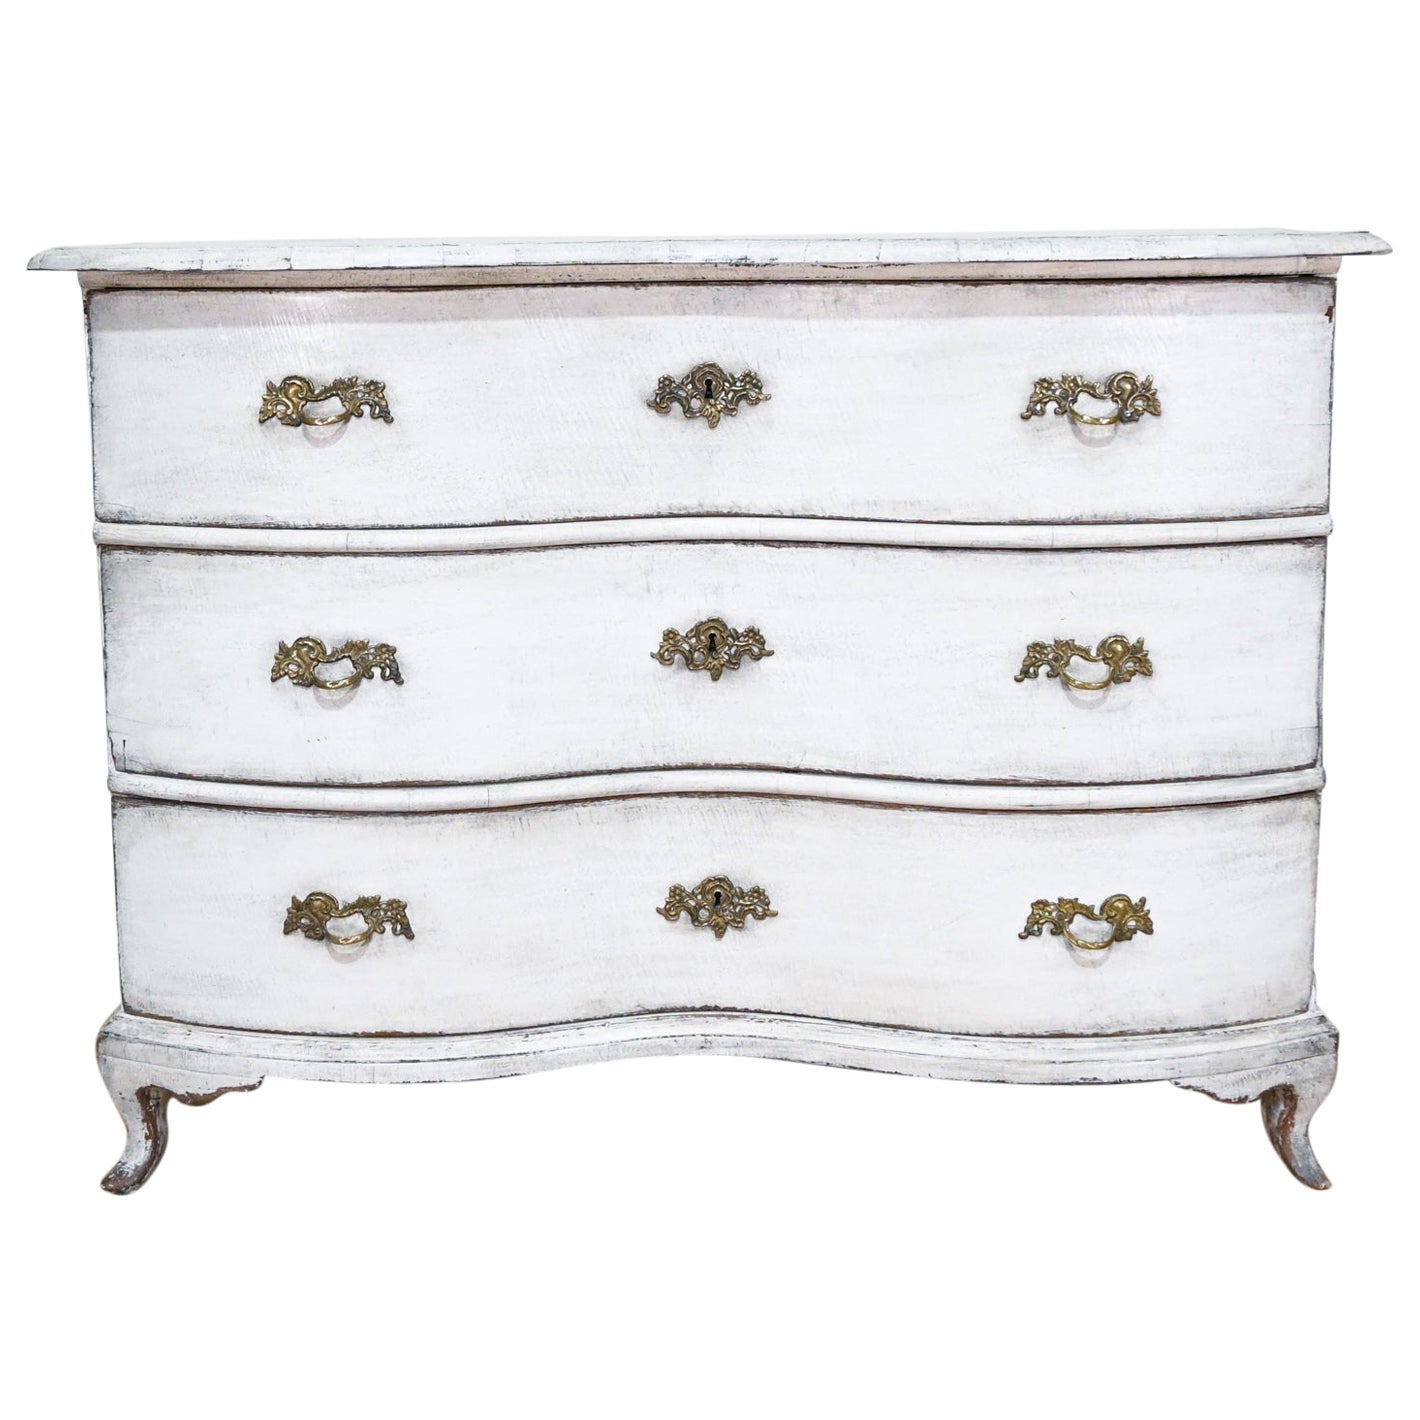 19th Century German Rococo Serpentine Bow Fronted White Painted Commode  For Sale